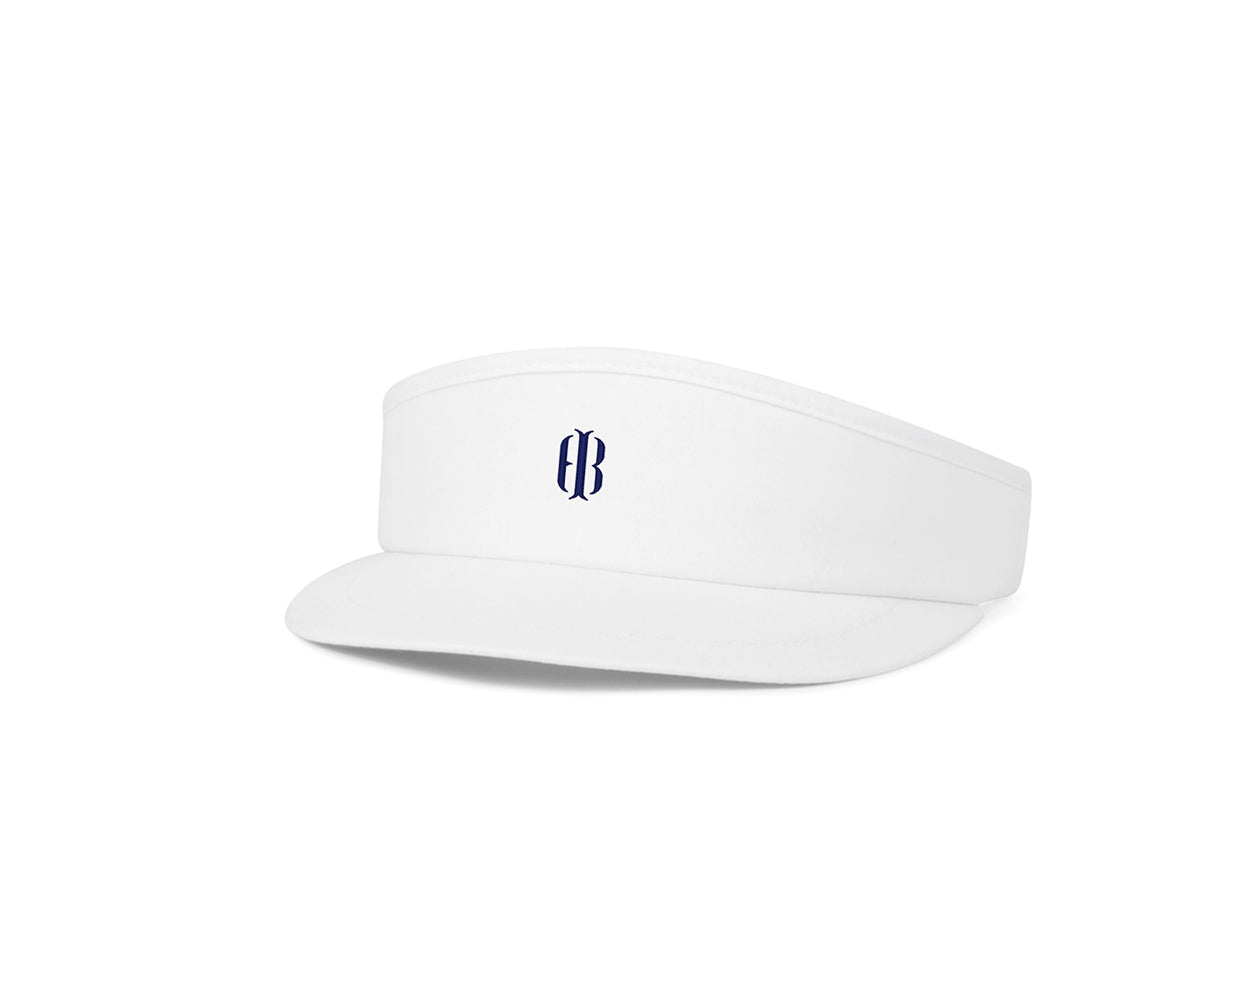 White high crown visor with navy Holderness and Bourne embroidered logo angled to the left.